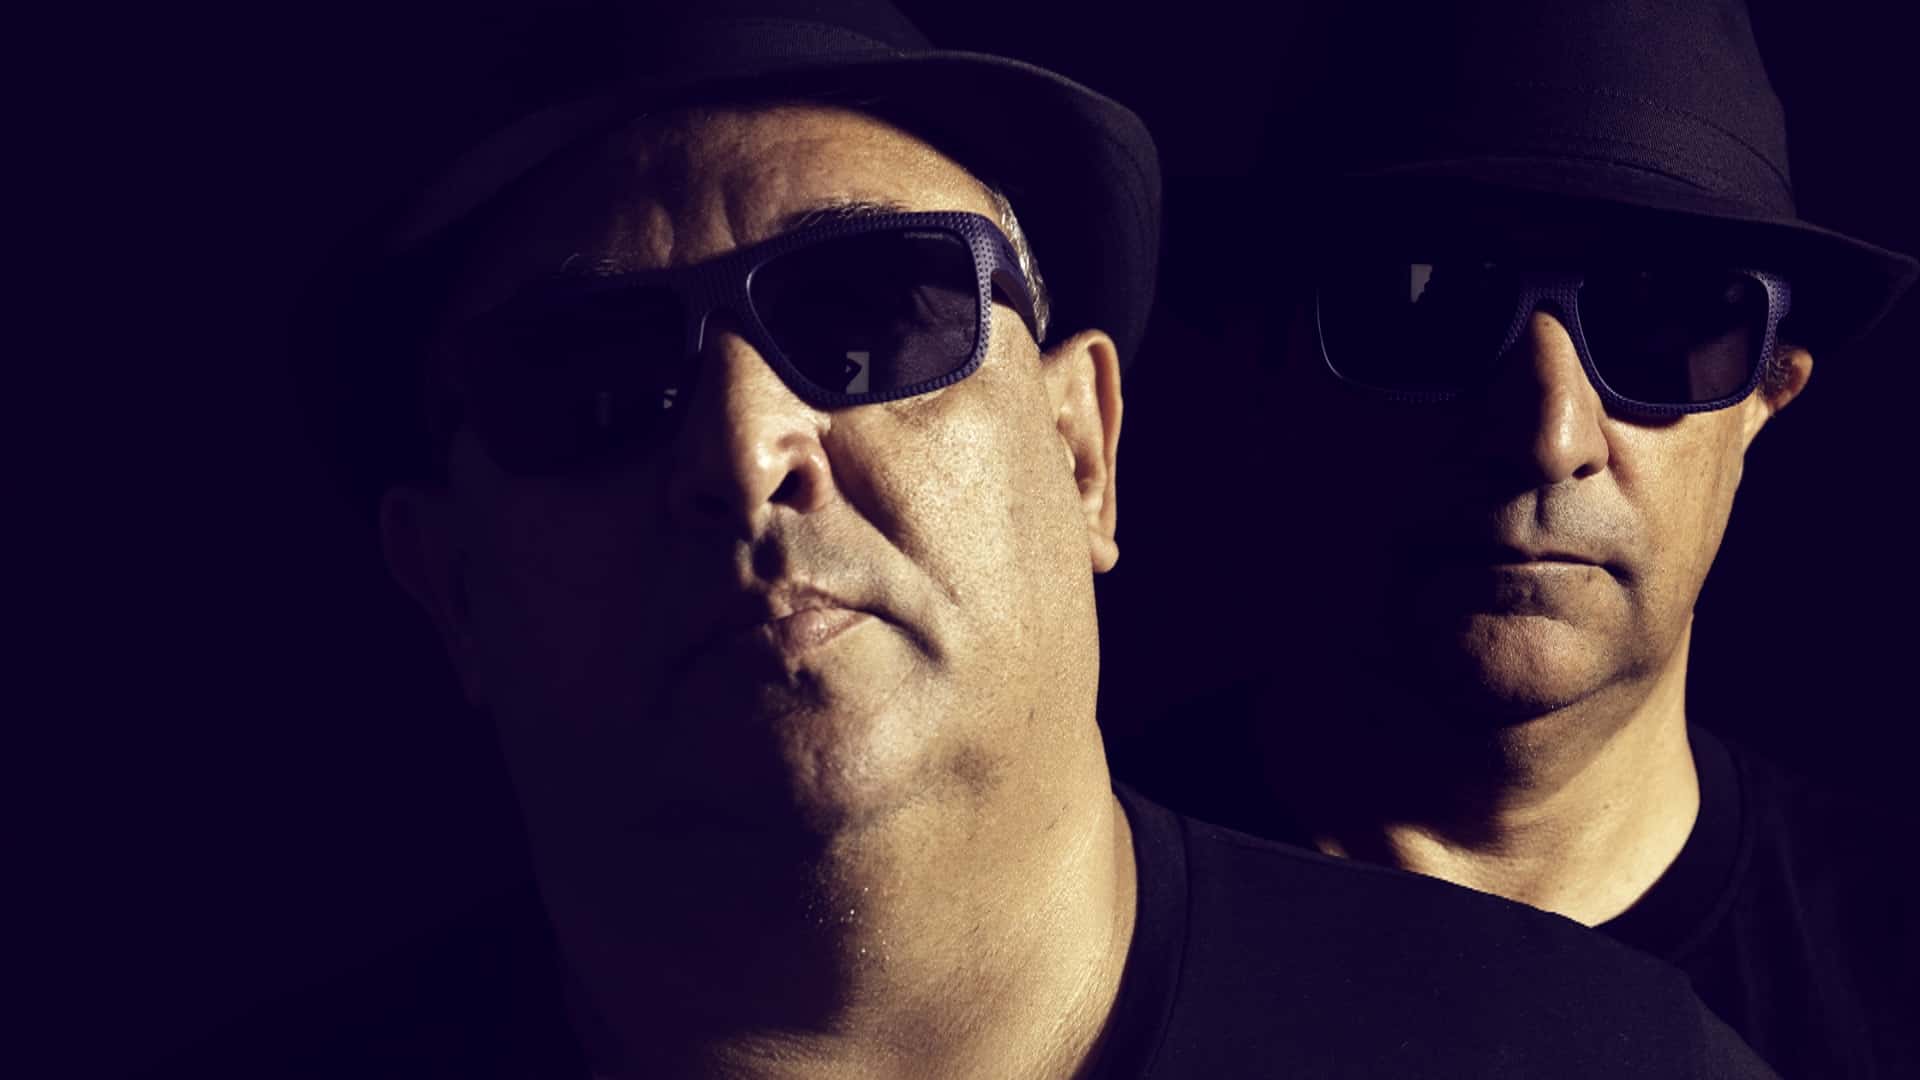 Bubba Brothers return to Mossdeb Sound with two brand-new dance floor tracks: Listen